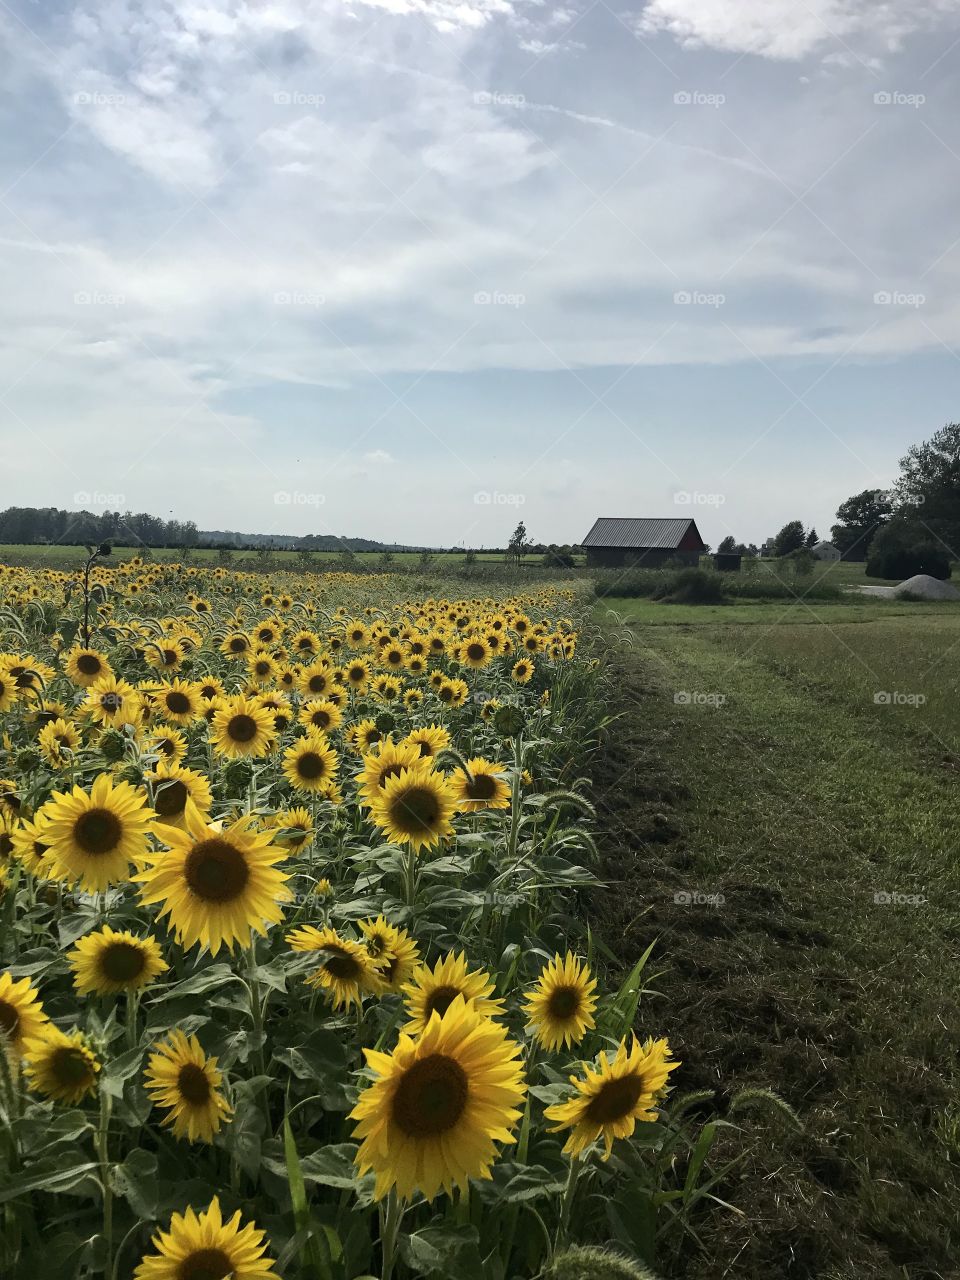 Sunflowers at Red Eagle 